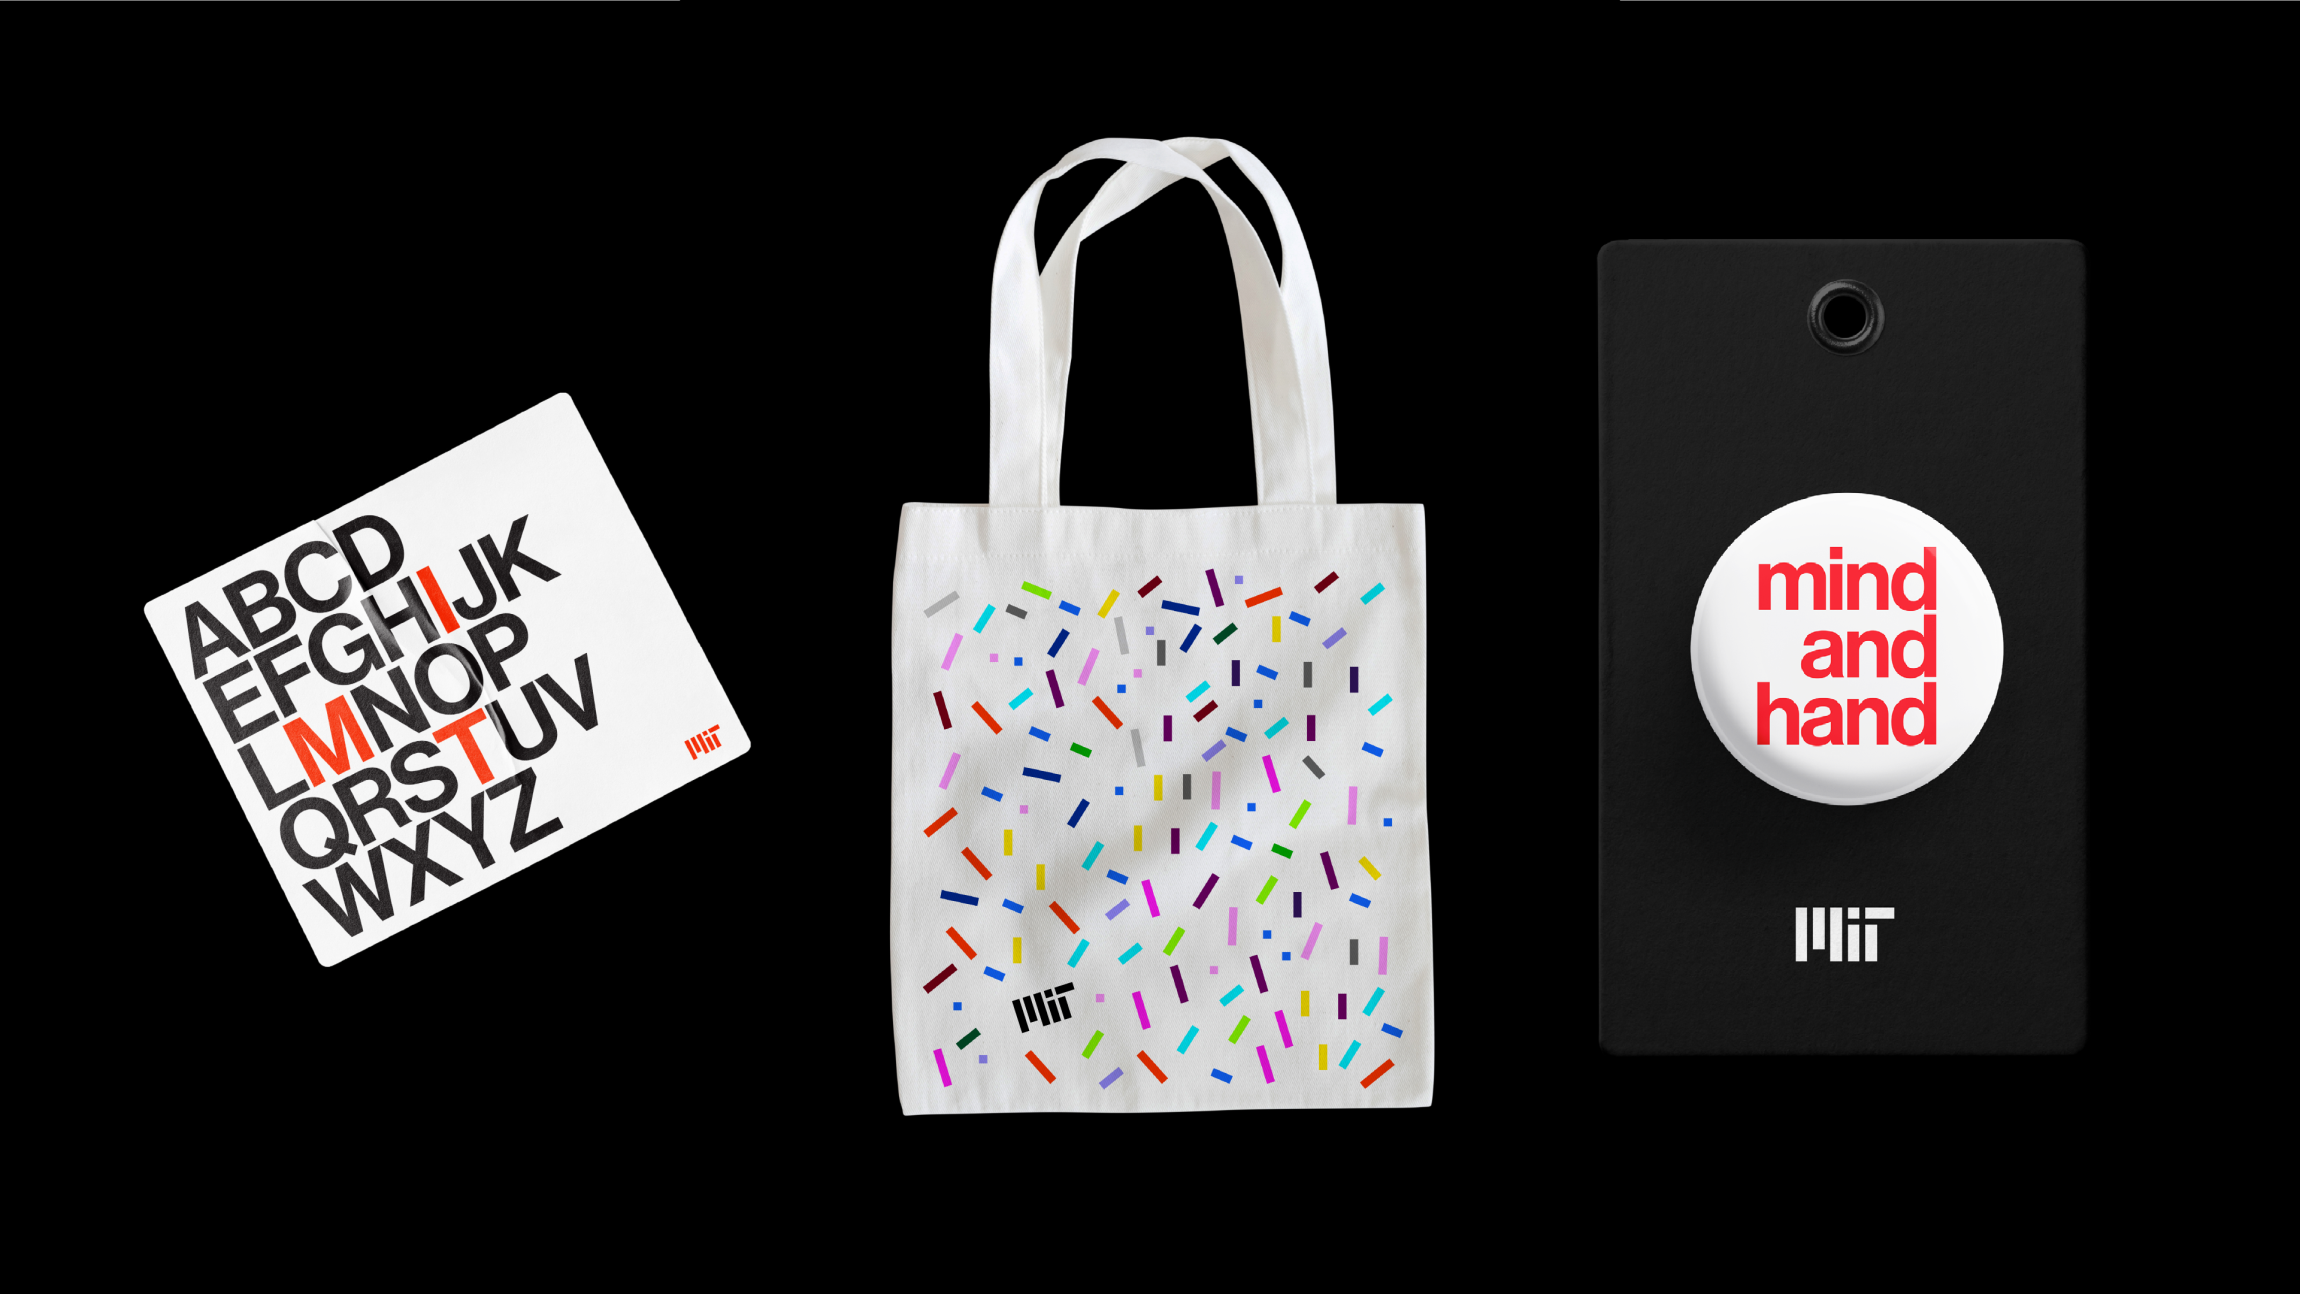 Conceptual designs of a sticker, confetti tote bag, and mind and hand button with the MIT logo and branded design elements.